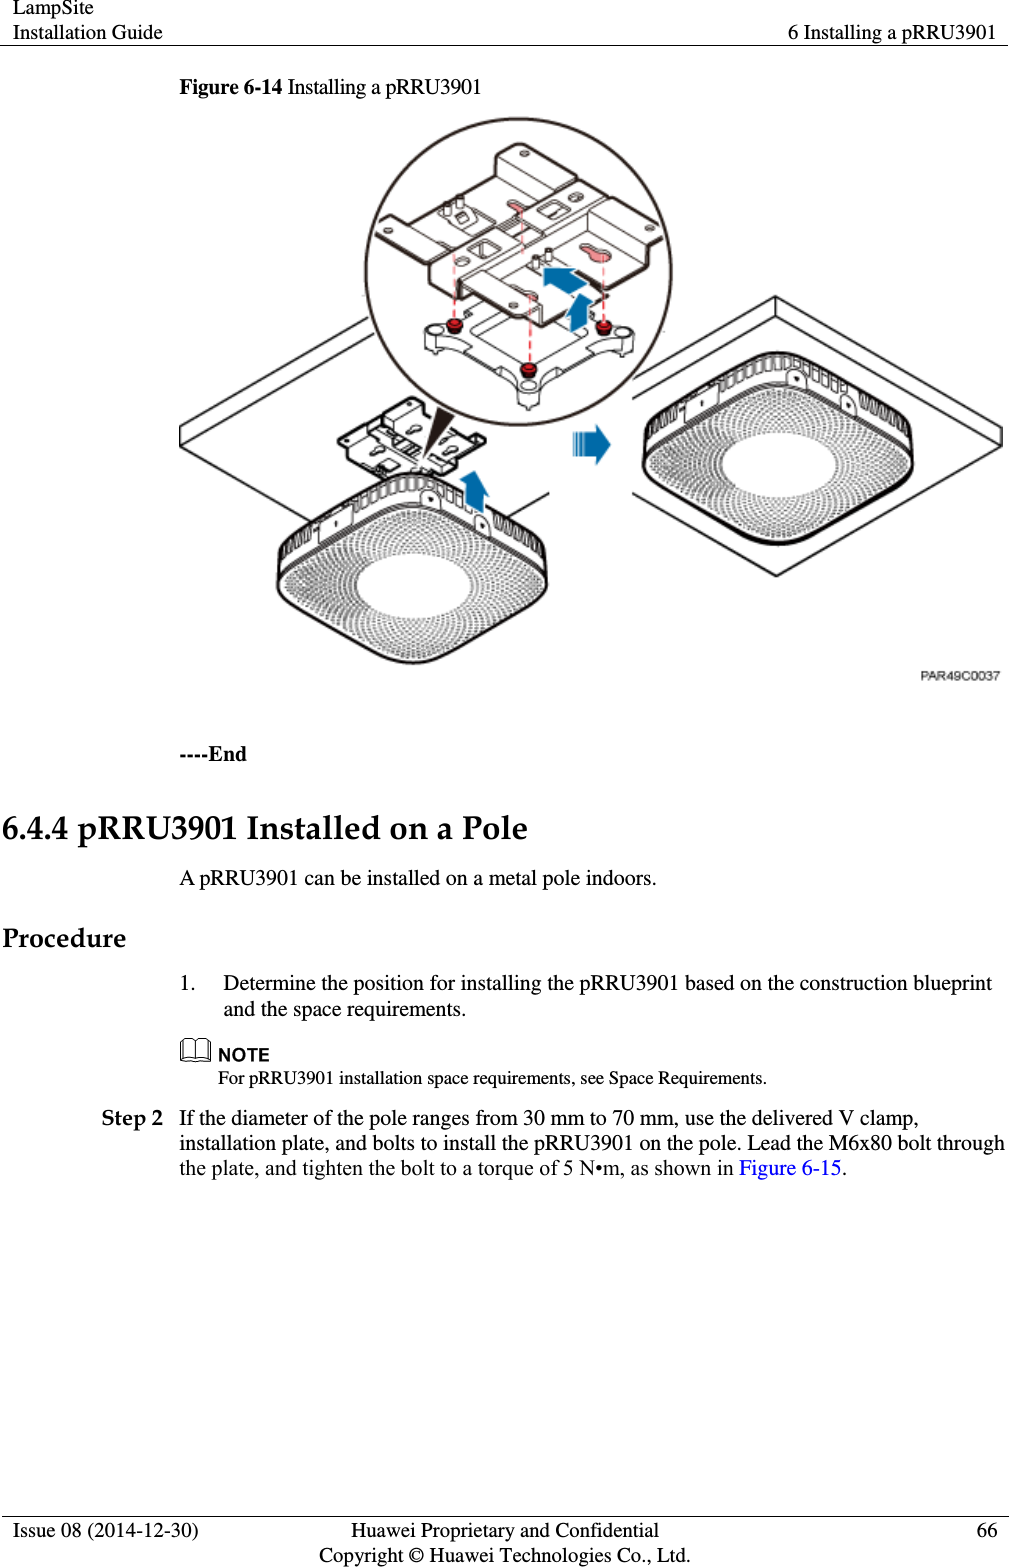 LampSite Installation Guide 6 Installing a pRRU3901  Issue 08 (2014-12-30) Huawei Proprietary and Confidential                                     Copyright © Huawei Technologies Co., Ltd. 66  Figure 6-14 Installing a pRRU3901   ----End 6.4.4 pRRU3901 Installed on a Pole A pRRU3901 can be installed on a metal pole indoors.   Procedure 1. Determine the position for installing the pRRU3901 based on the construction blueprint and the space requirements.  For pRRU3901 installation space requirements, see Space Requirements. Step 2 If the diameter of the pole ranges from 30 mm to 70 mm, use the delivered V clamp, installation plate, and bolts to install the pRRU3901 on the pole. Lead the M6x80 bolt through the plate, and tighten the bolt to a torque of 5 N•m, as shown in Figure 6-15. 